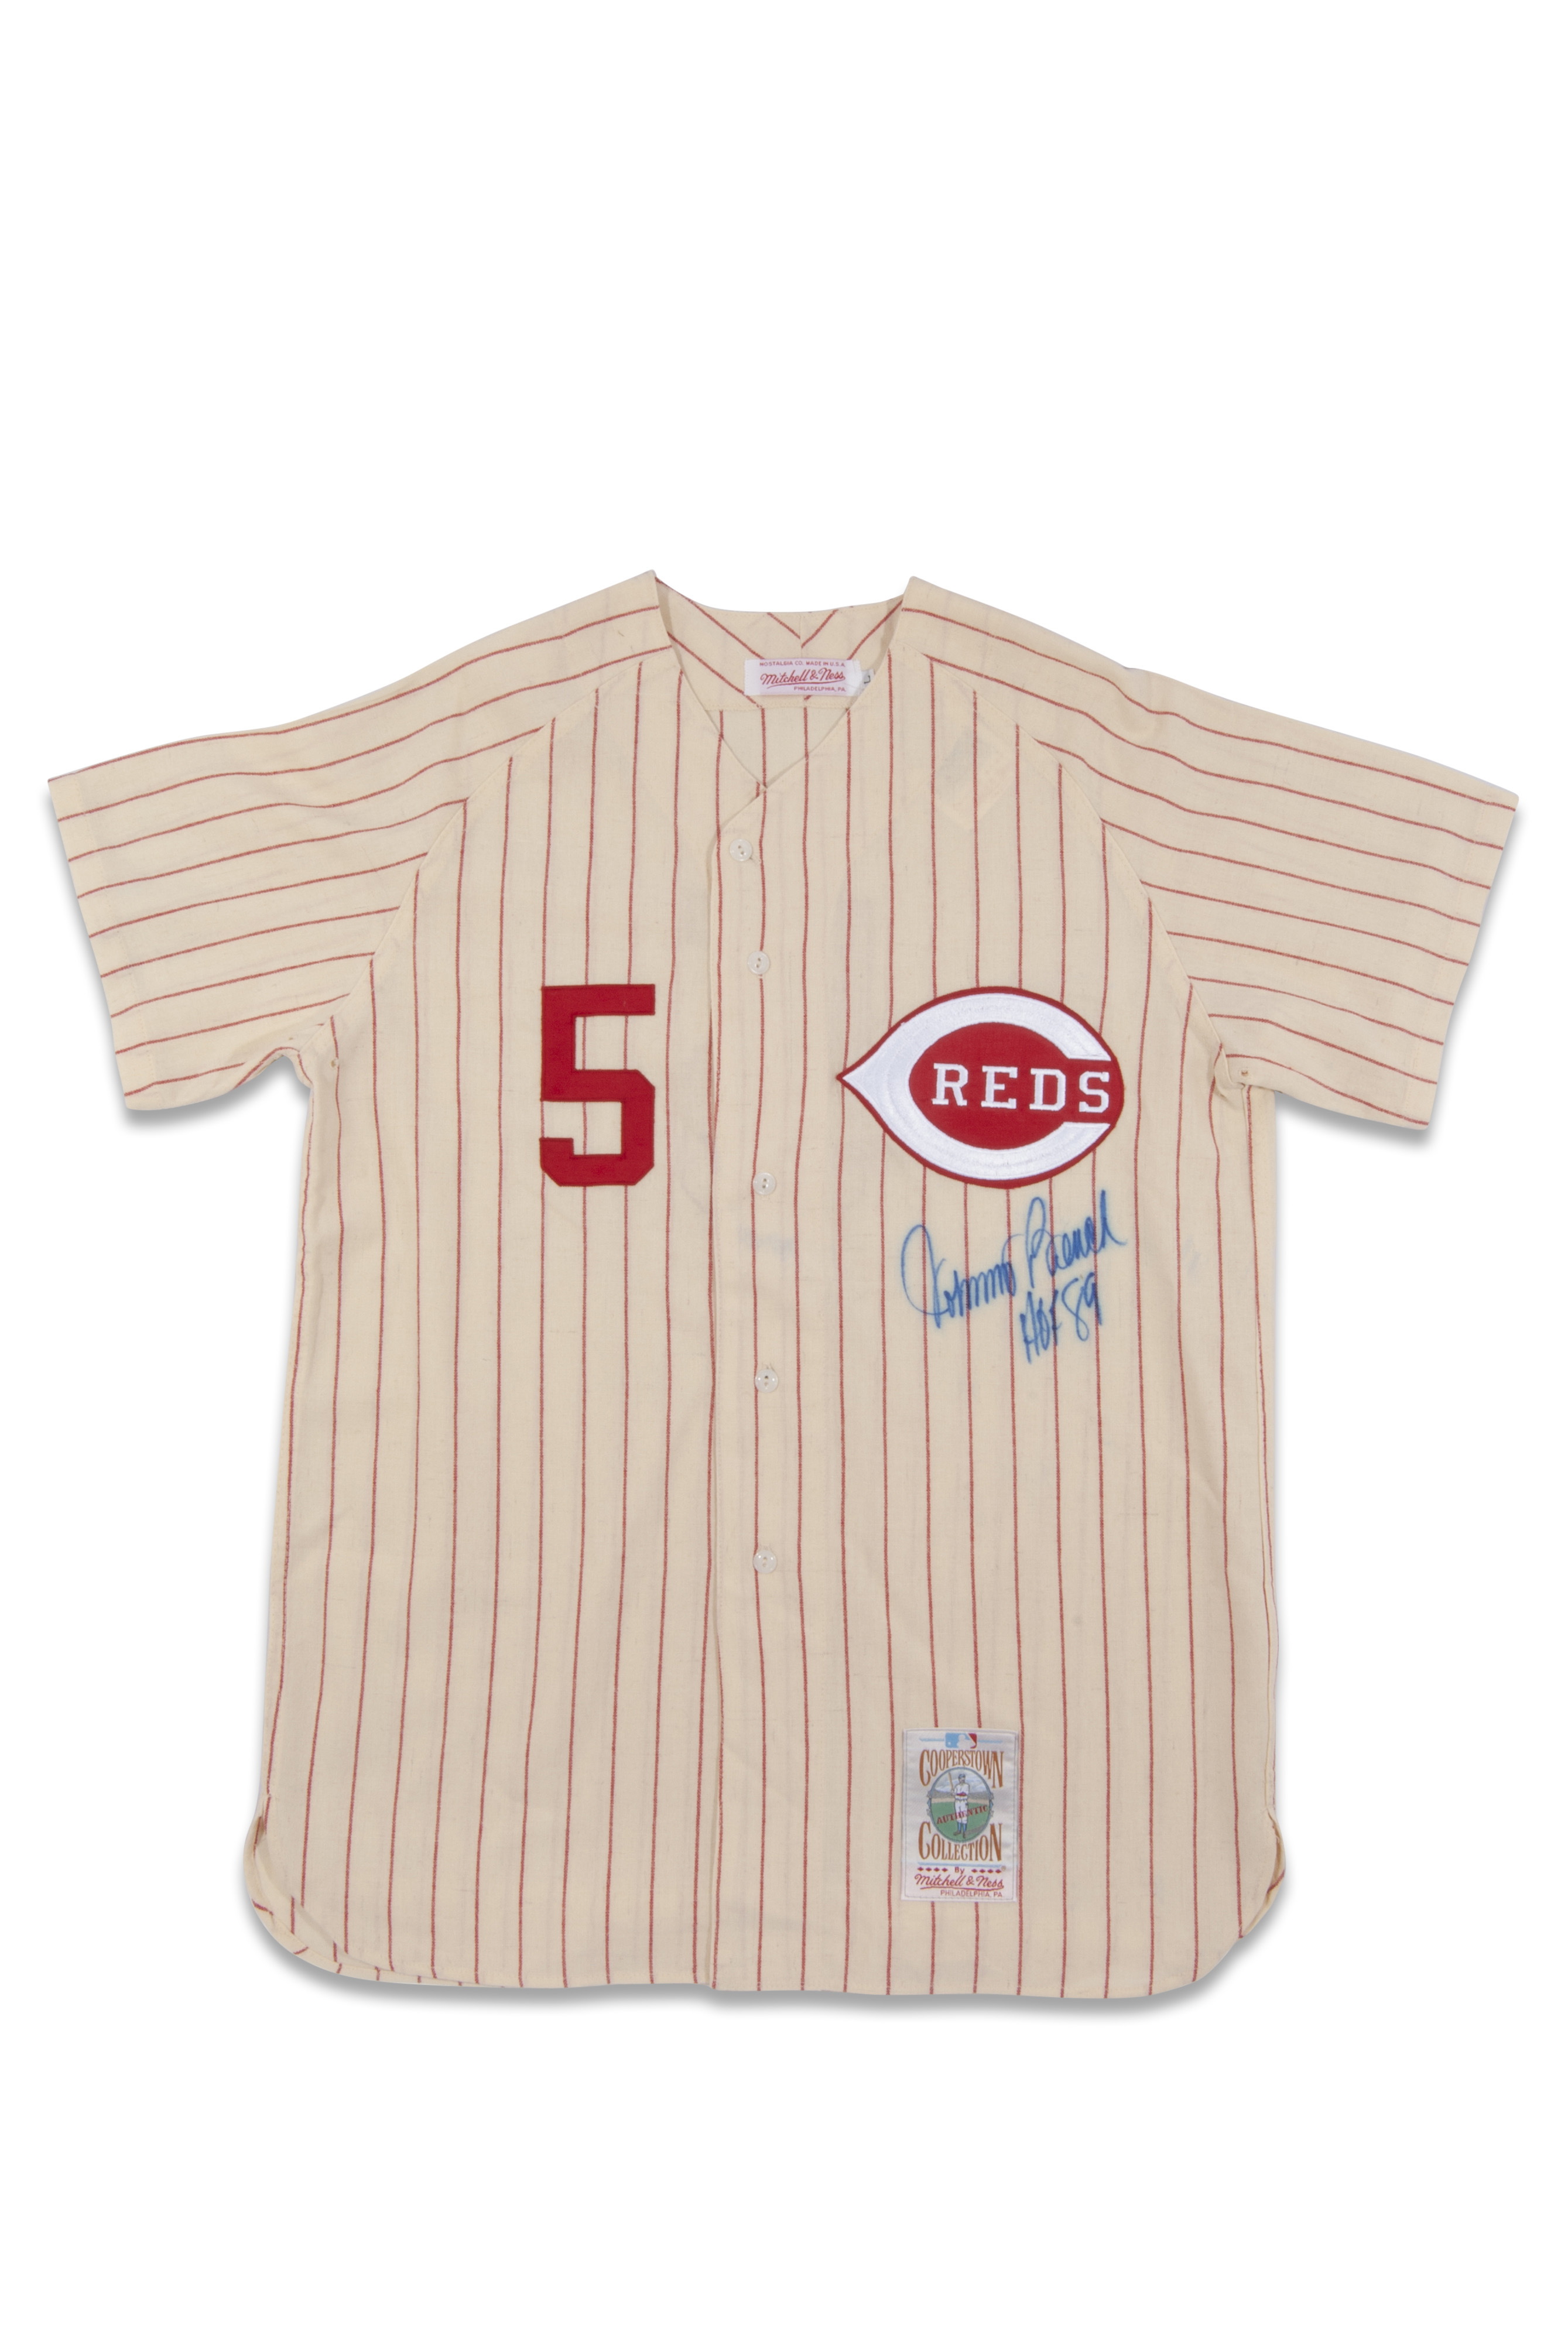 johnny bench button down jersey